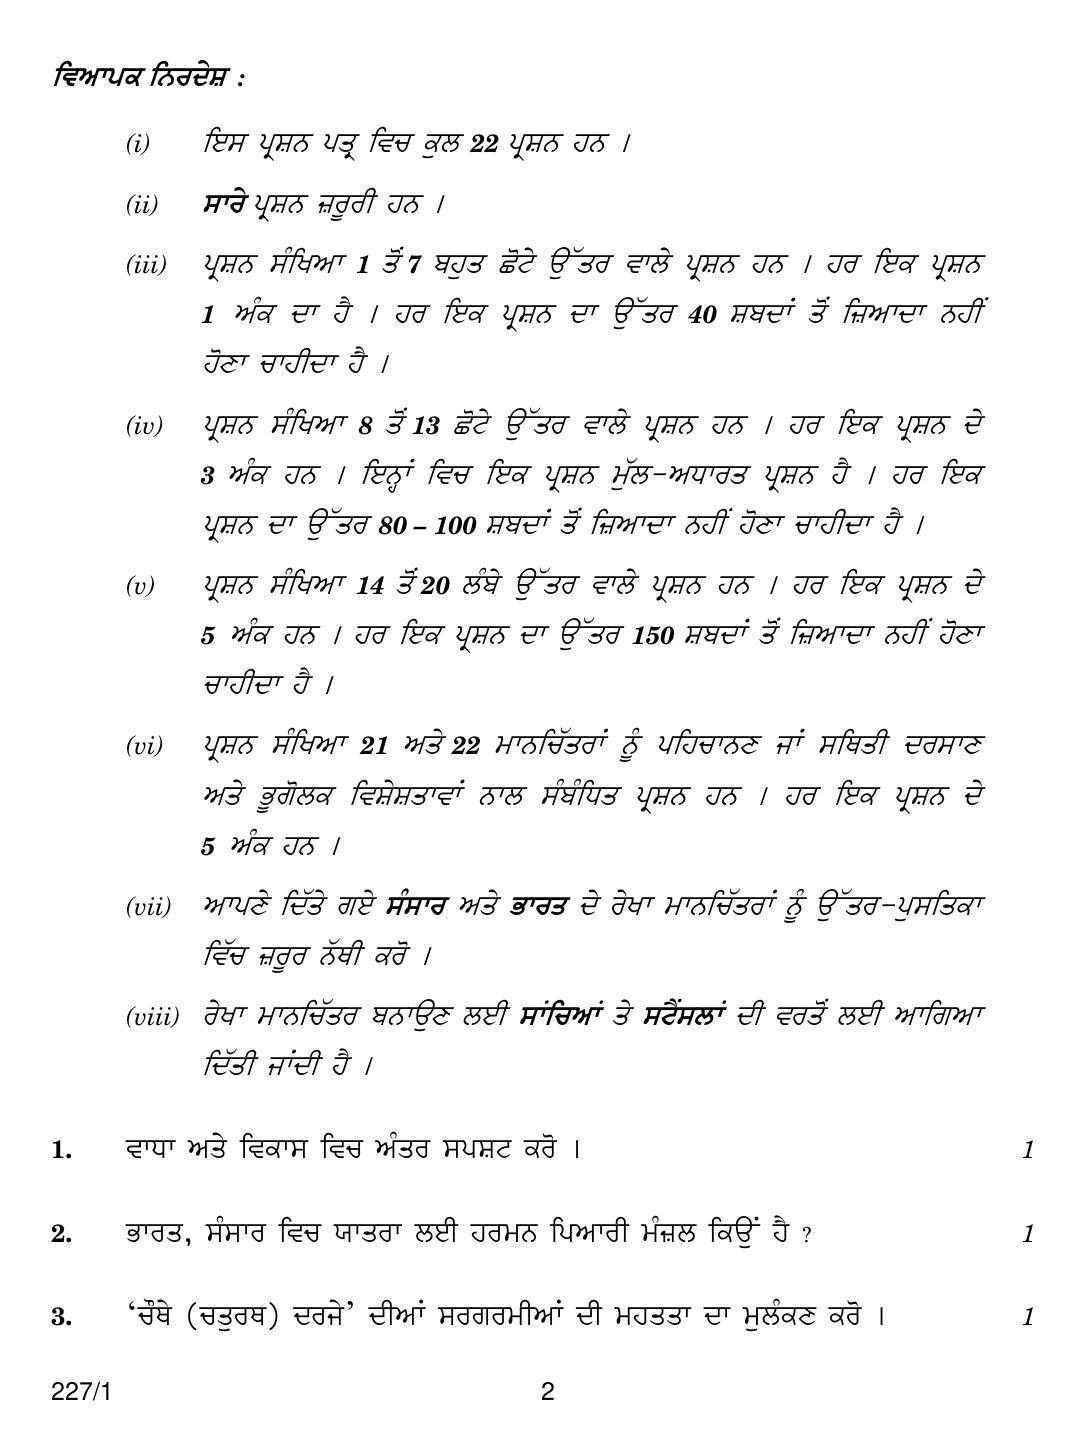 CBSE Class 12 227-1 GEOGRAPHY PUNJABI VERSION 2018 Question Paper - Page 2